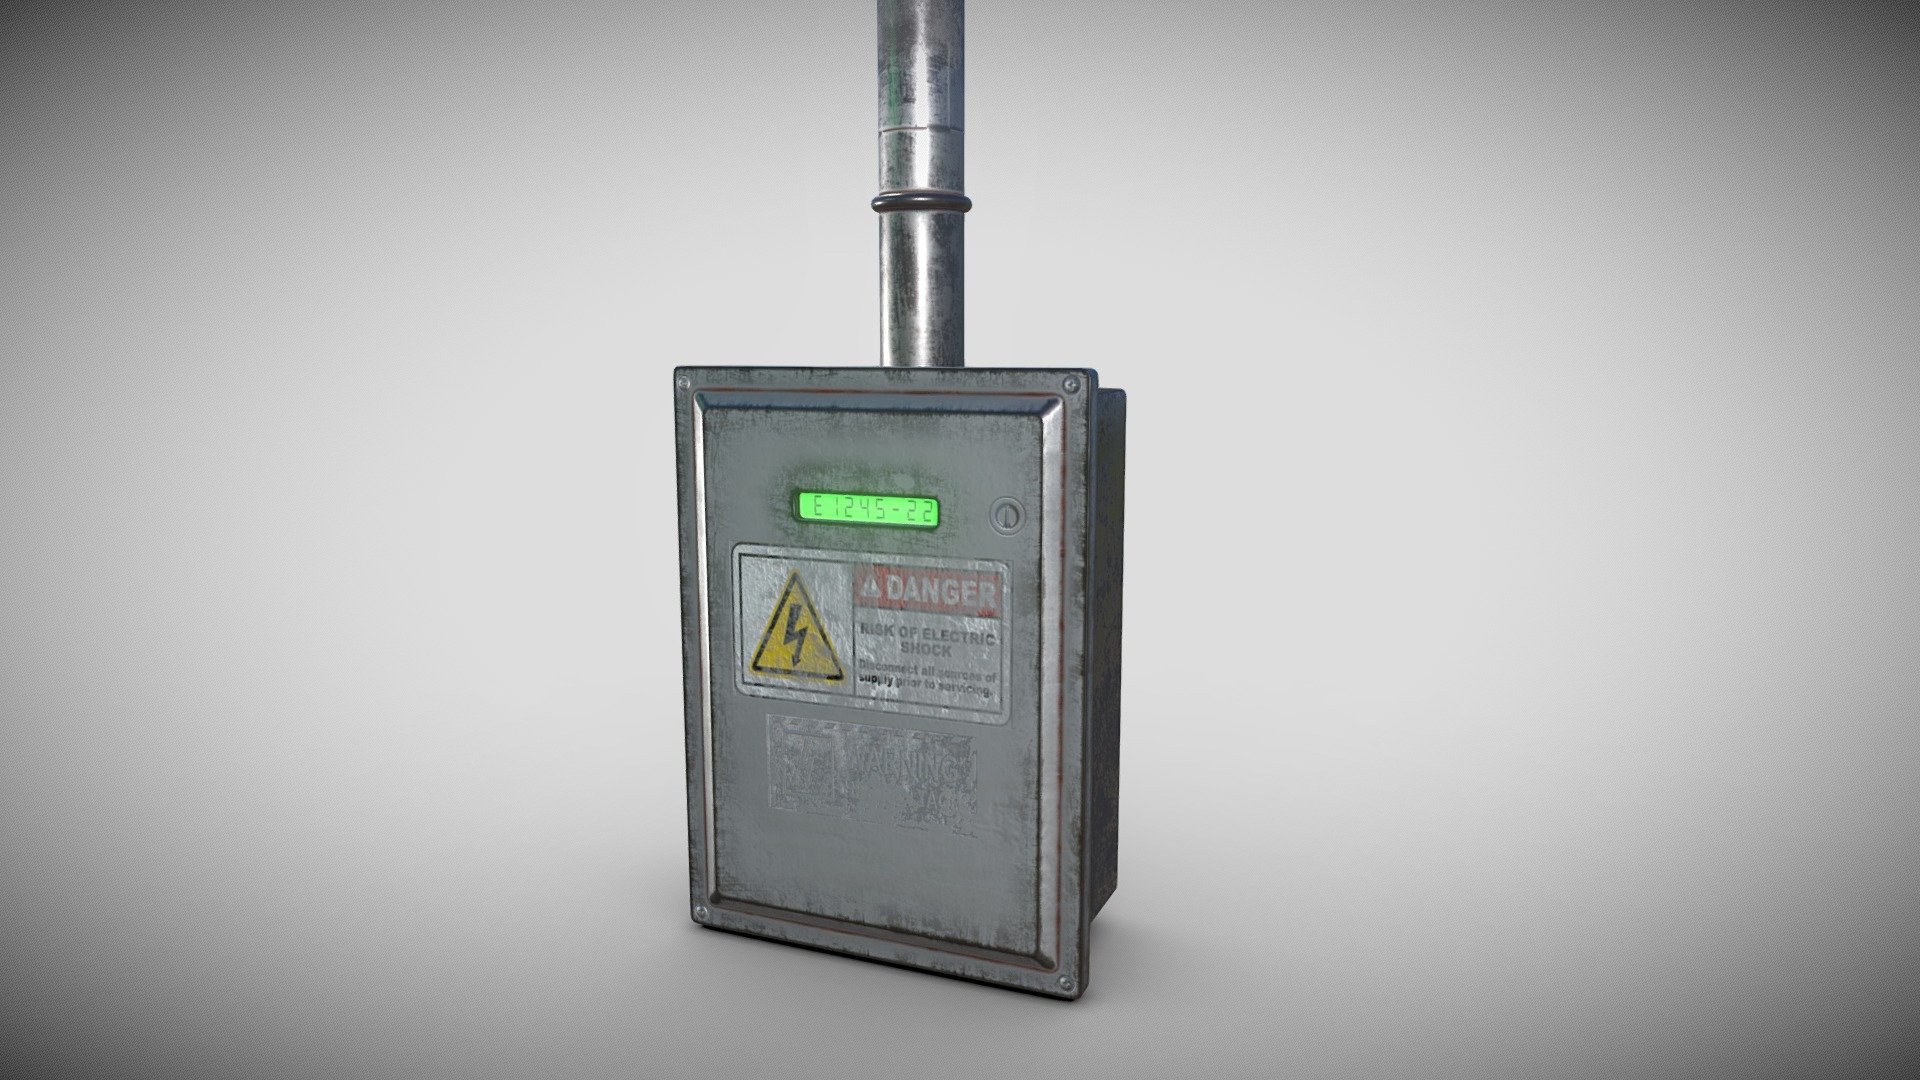 Basic electric meter with pipes with slightly illuminated number reader, useful background prop.

4K PBR textures 3d model